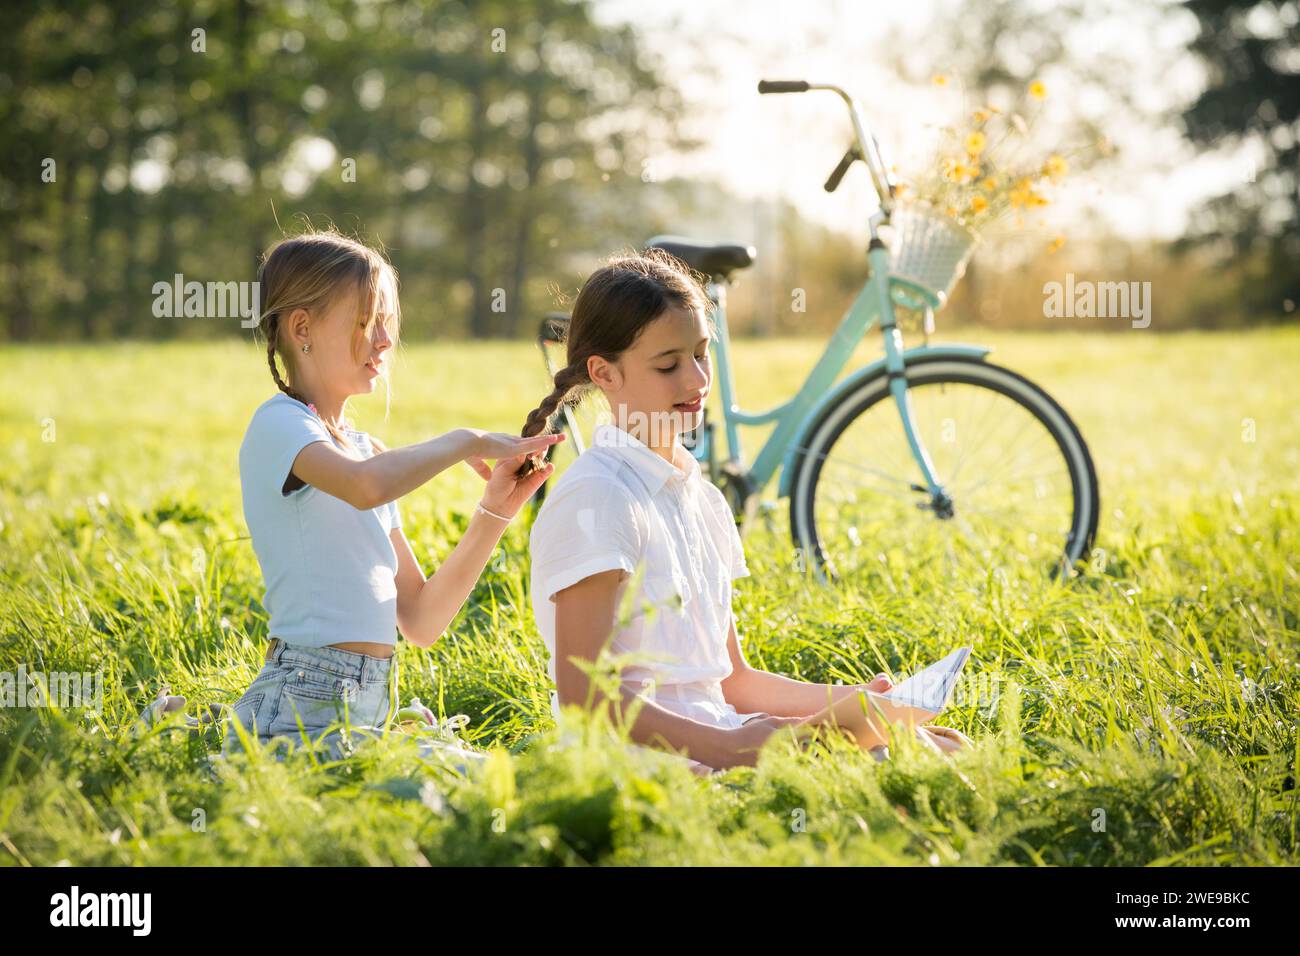 Two teenage girls spend time on green grass lawn in park, braid pigtails and tails for each other, read books, enjoy summer and vacations Stock Photo